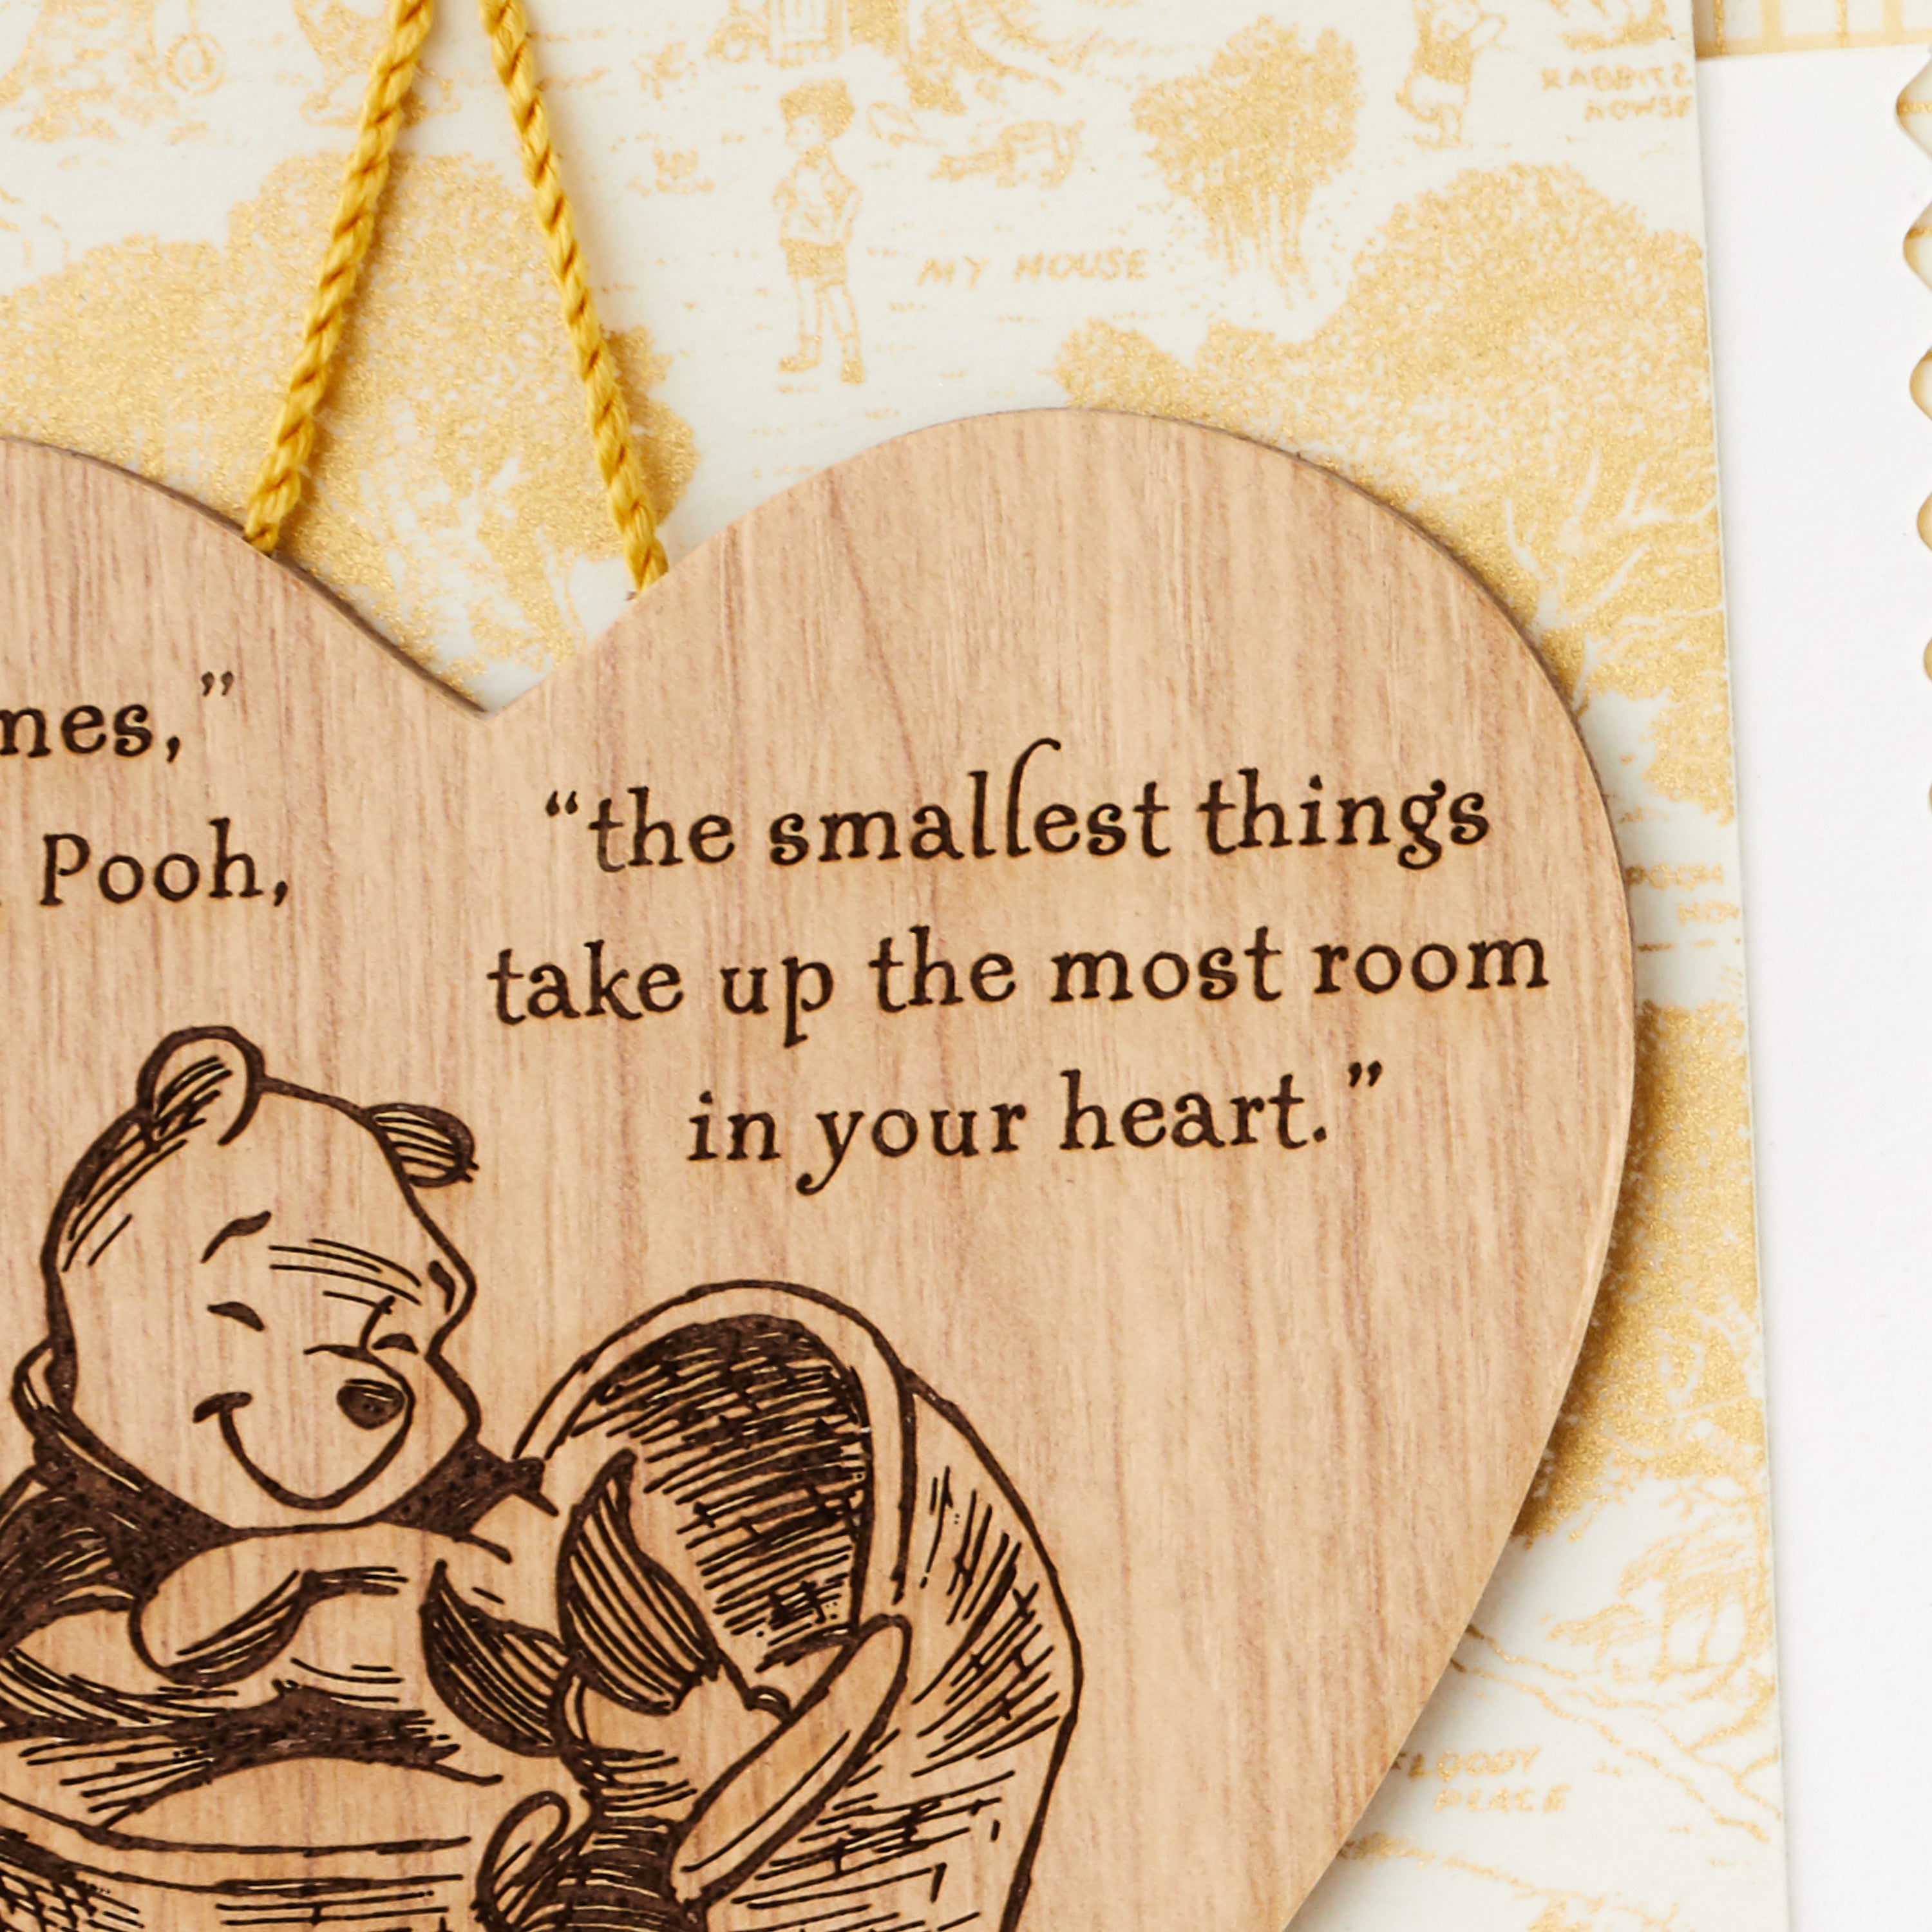 Hallmark Winnie the Pooh Baby Shower Card with Removable Ornament (Pooh and Piglet)